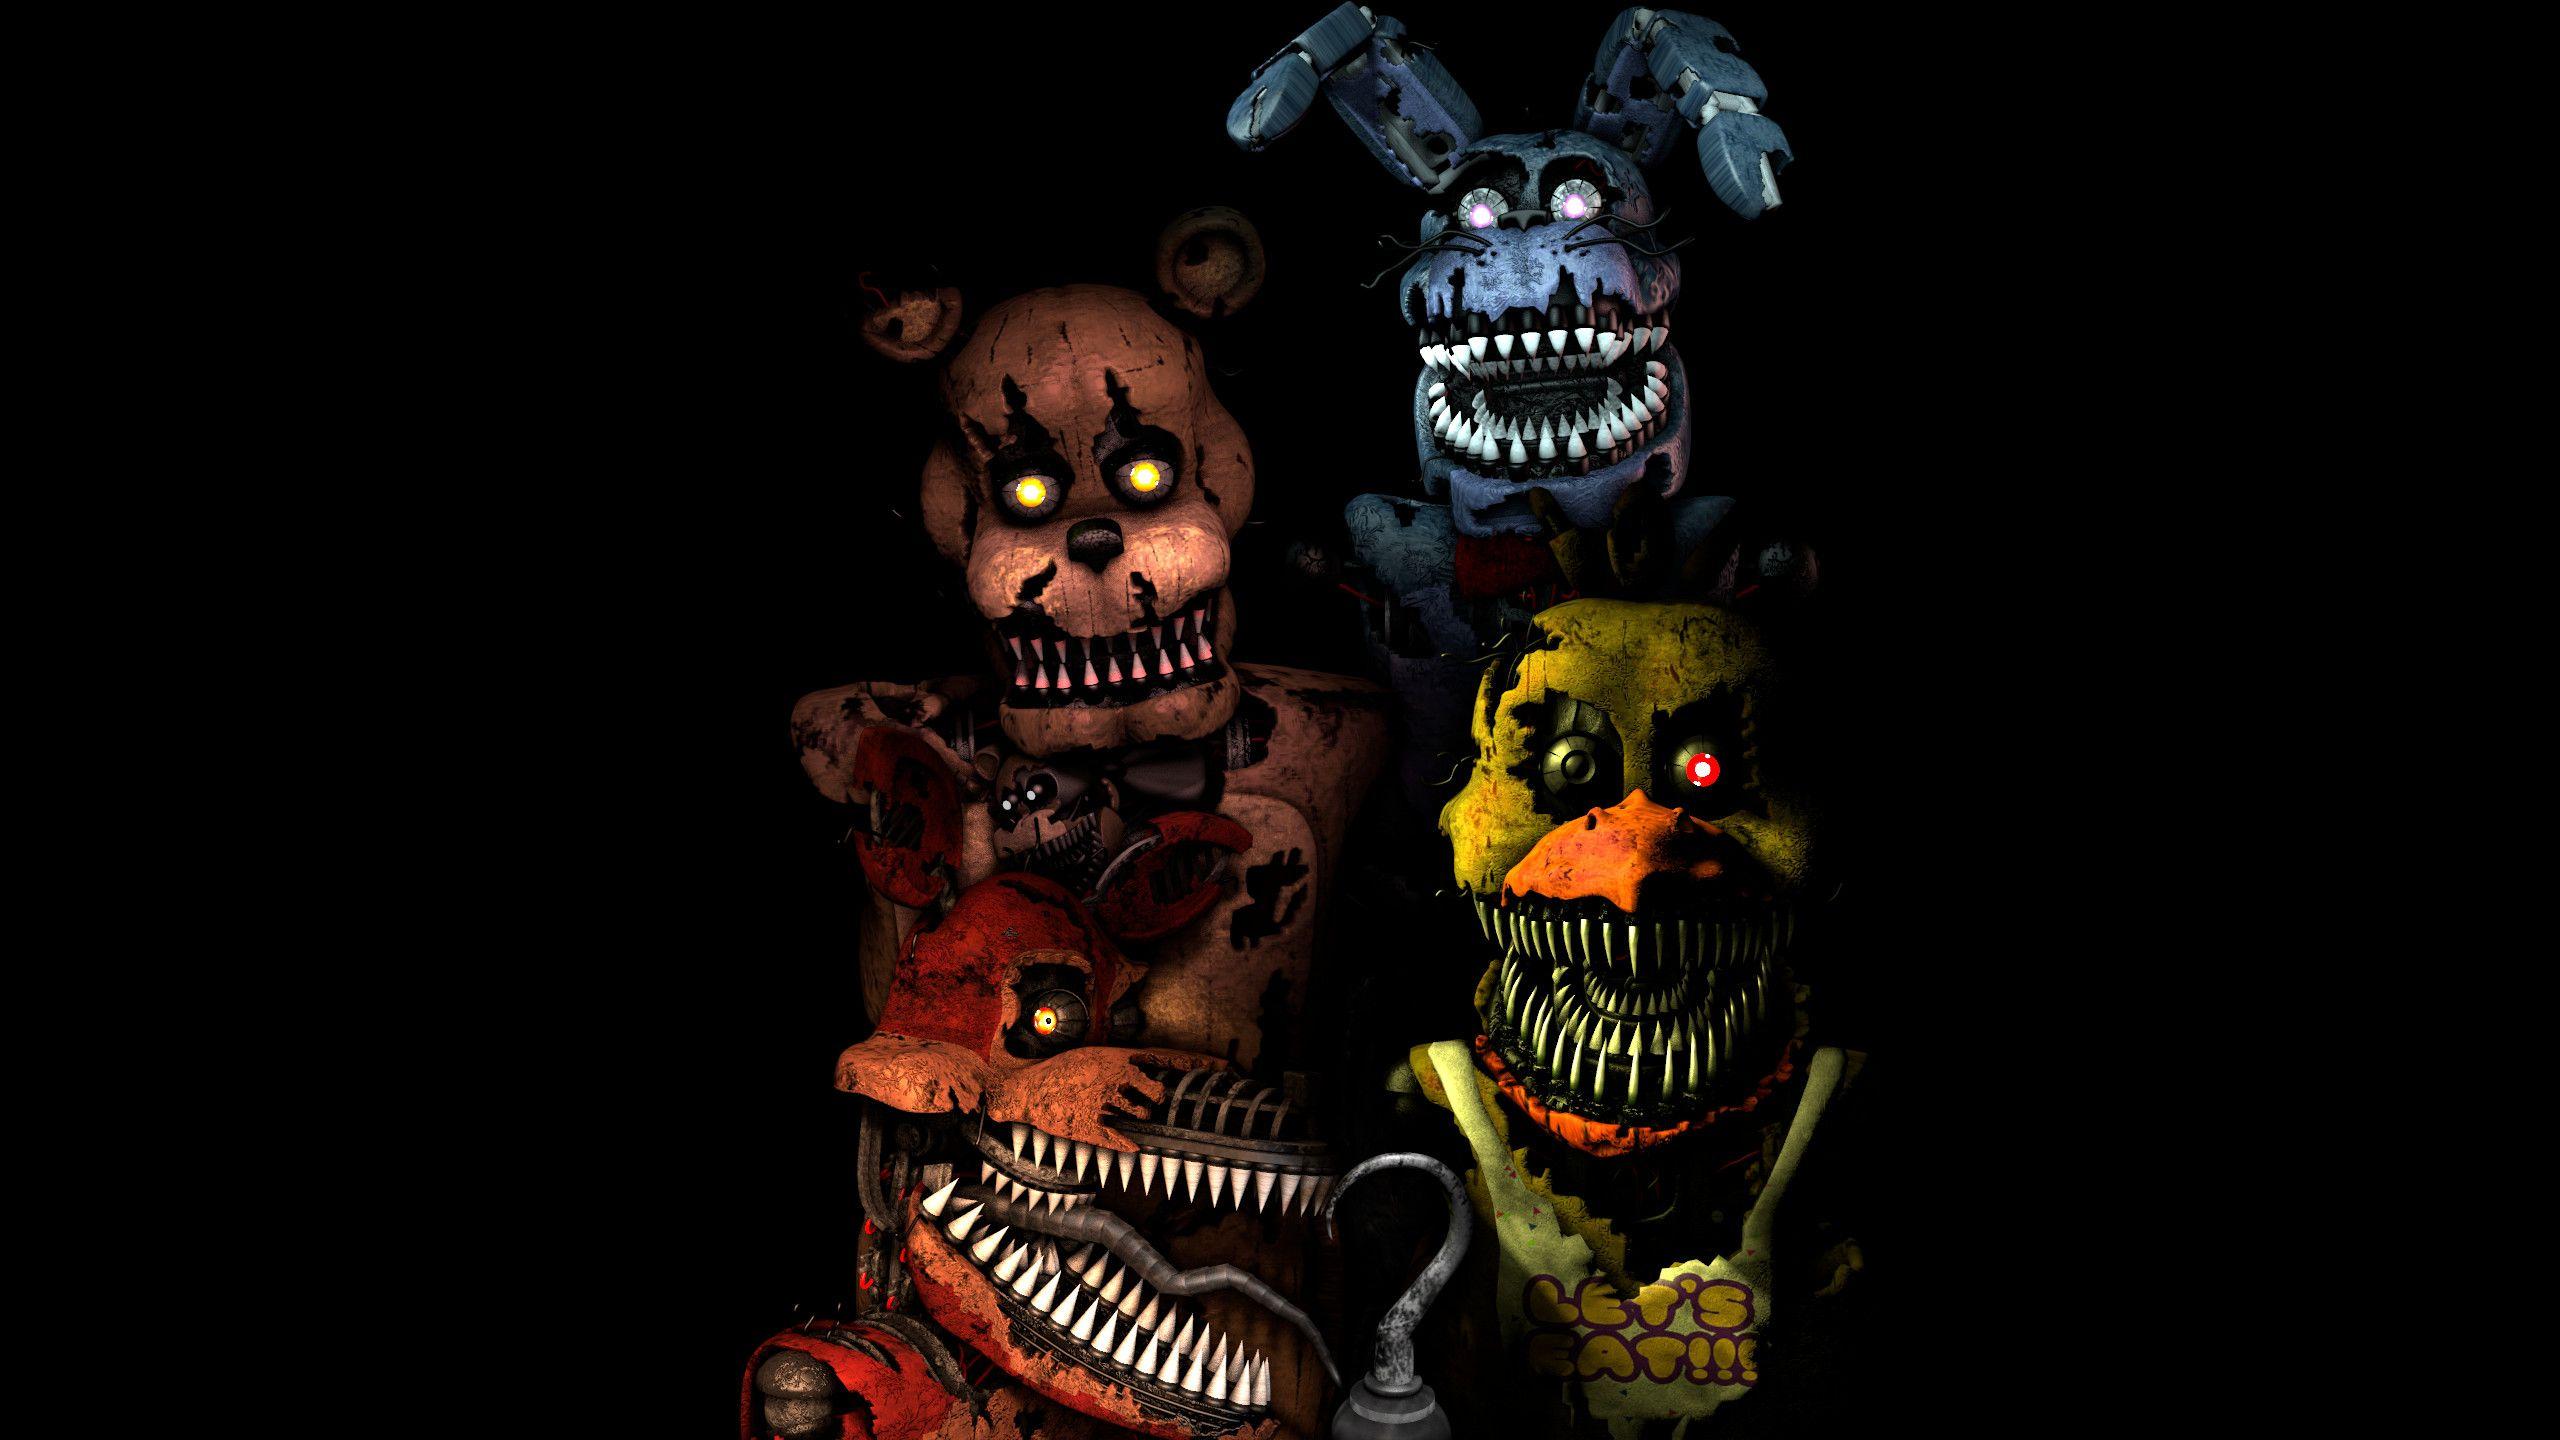 2560 x 1440 · jpeg - Scary FNAF Wallpapers - Wallpaper Cave